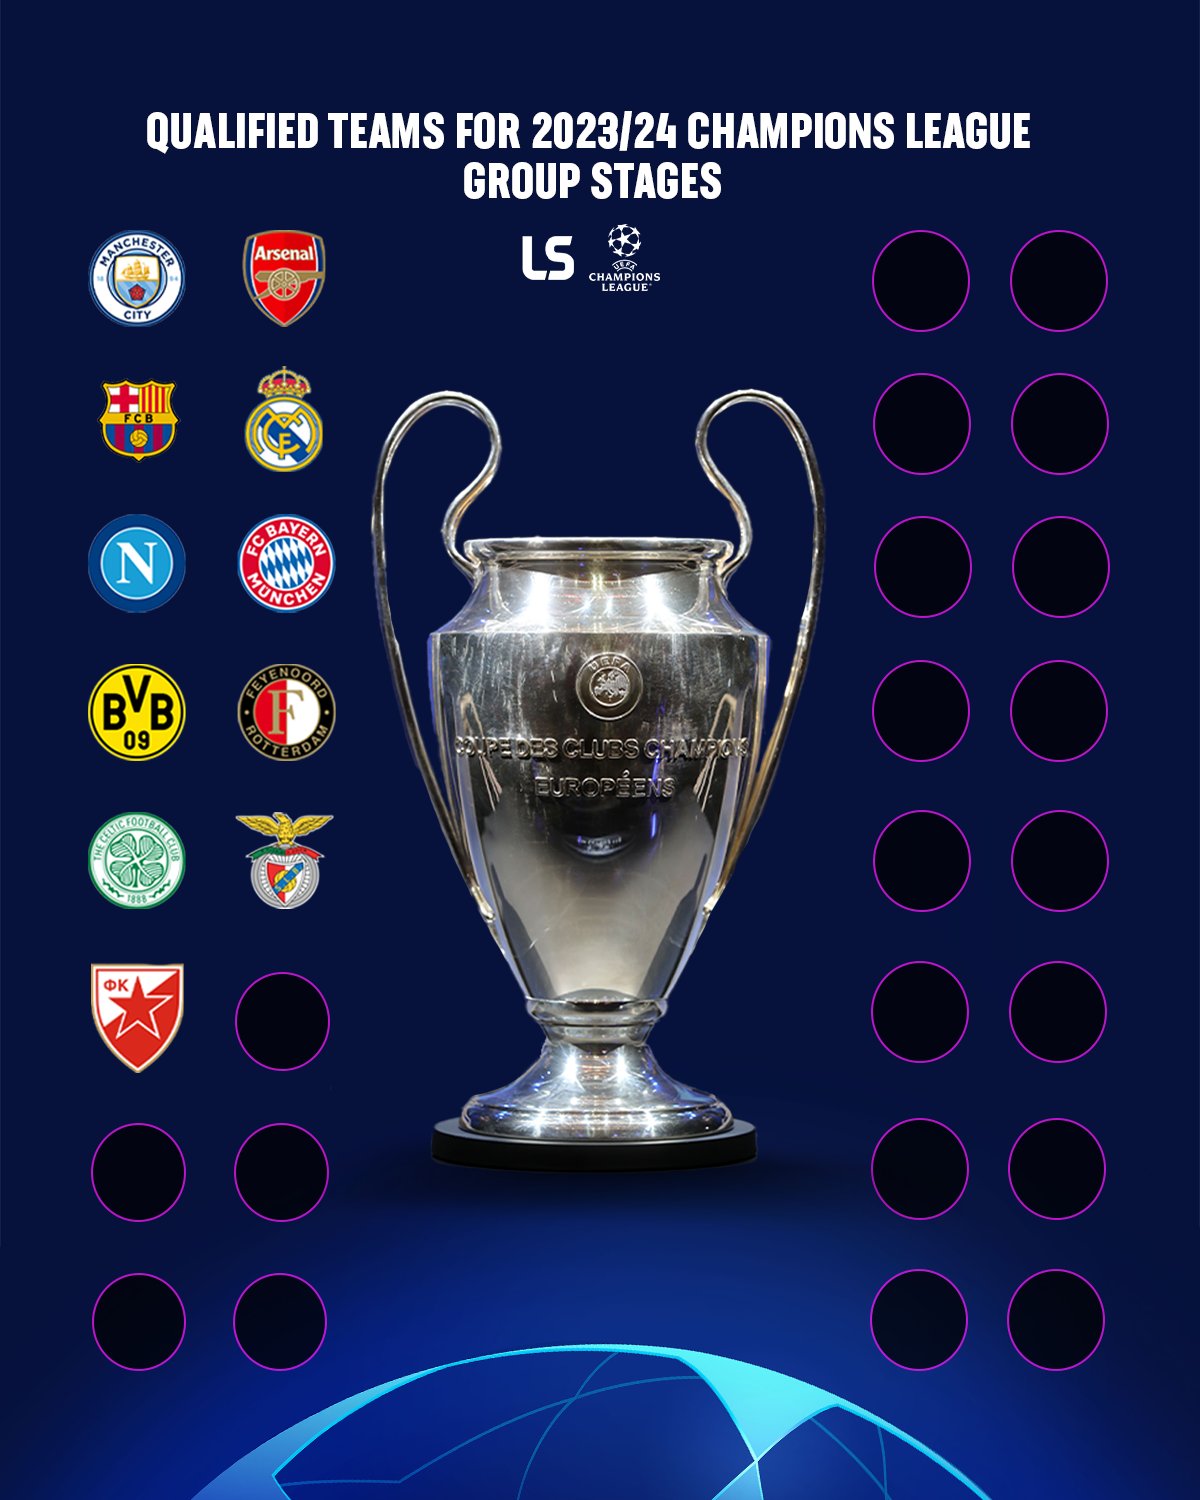 UEFA CHAMPIONS LEAGUE 2023/2024 Qualifications - Qualified Teams